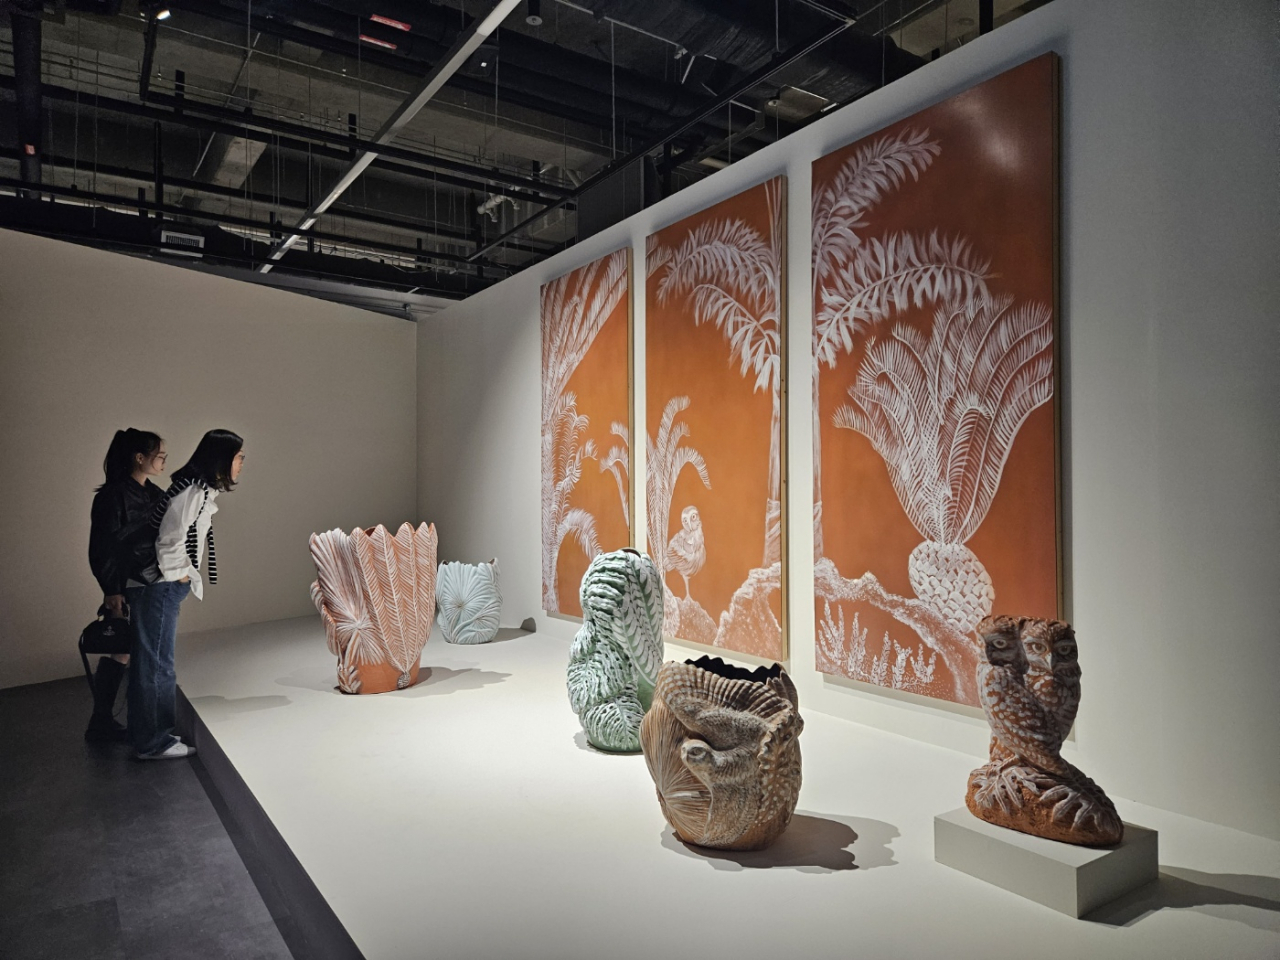 Visitors take a closer look at ceramic artist Kim Myung-jin's terracotta works on Thursday at Culture Factory in Cheongju. (Park Yuna/The Korea Herald)